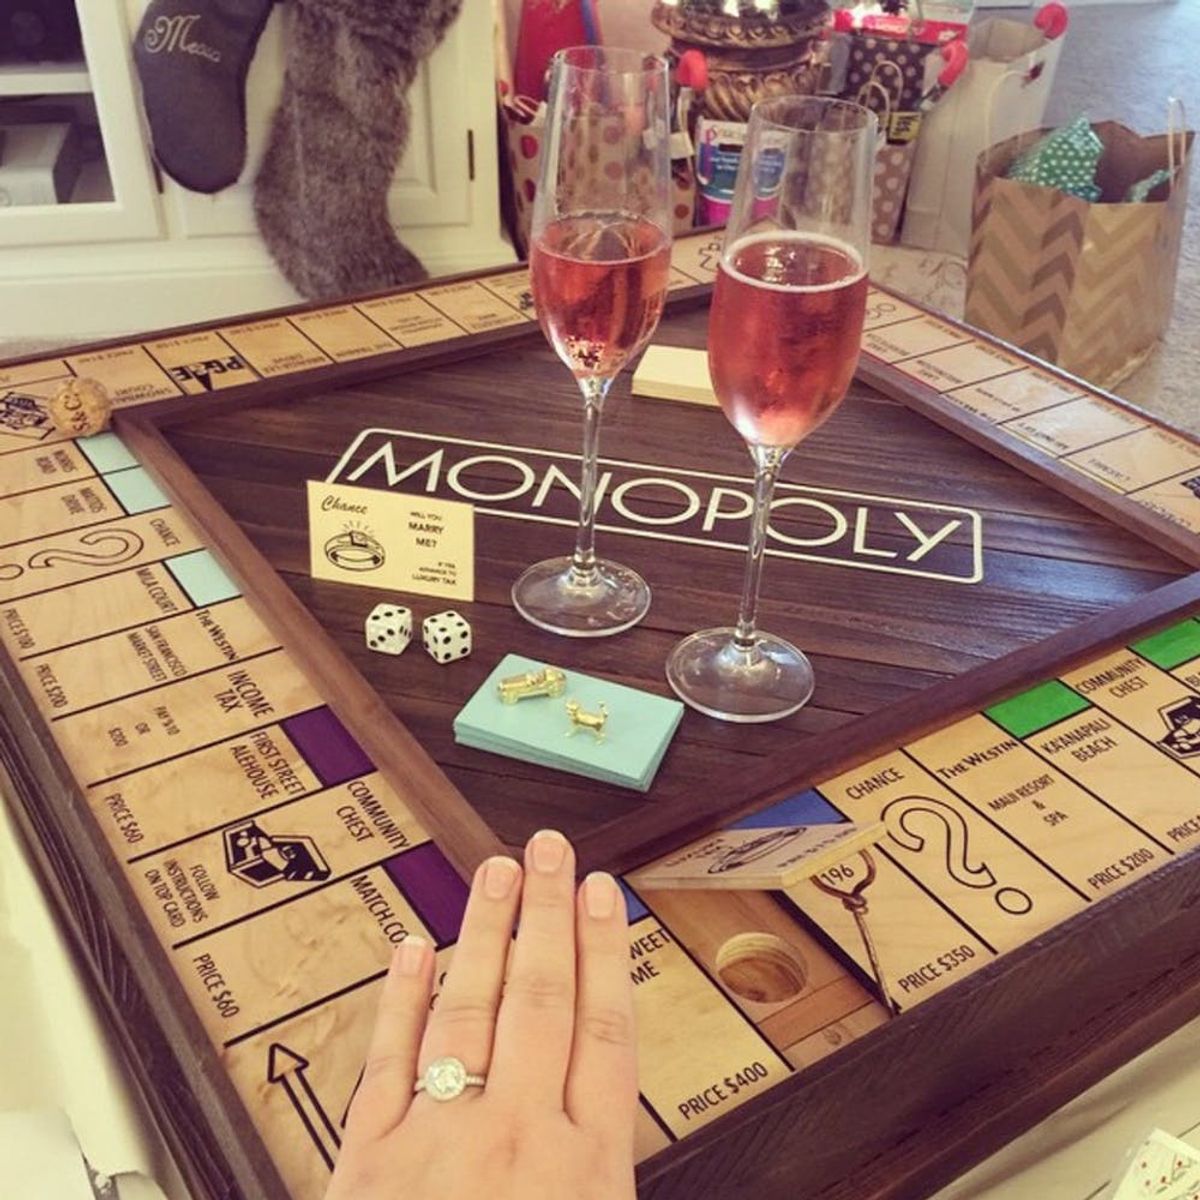 This Guy Proposed to His Fiancé With a Custom-Made Monopoly Board